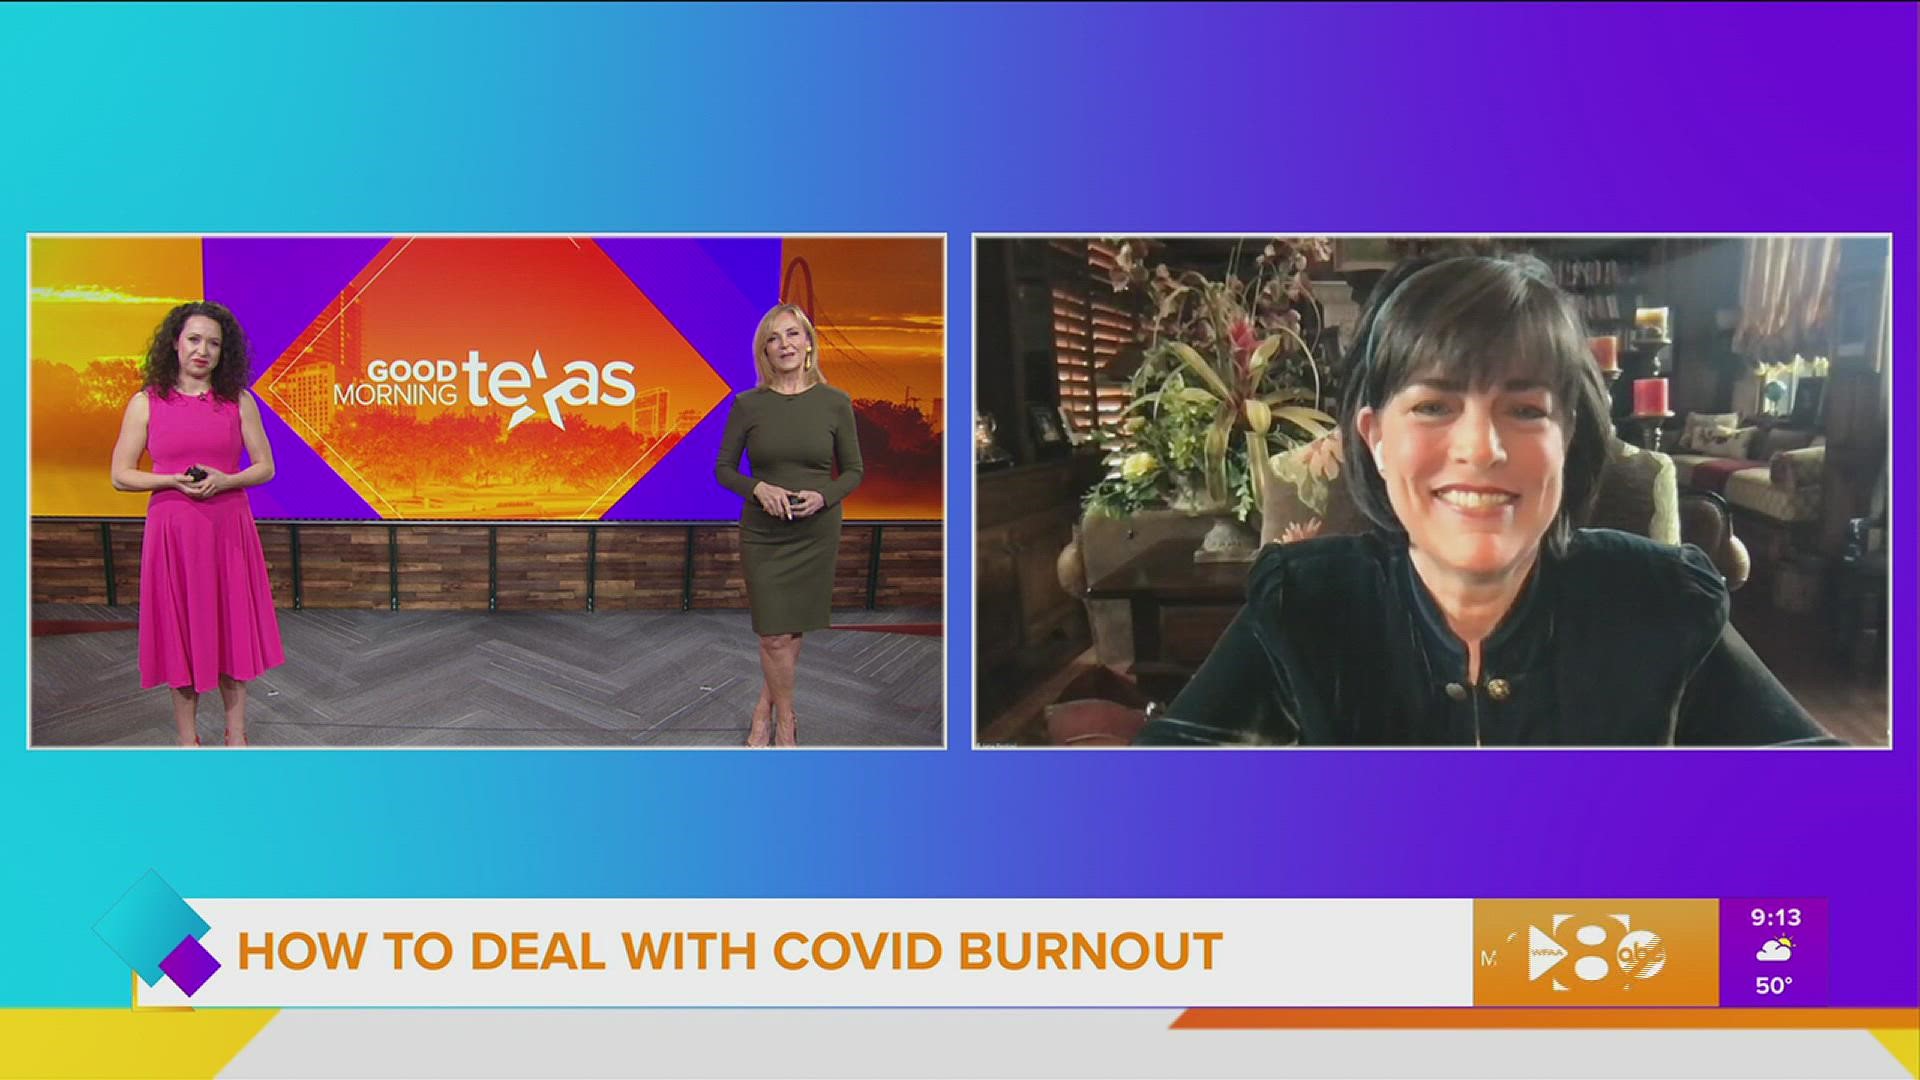 Psychologist and spiritual leader Dr. Jana Rentzel offers 5 tips to deal with Covid-19 burnout